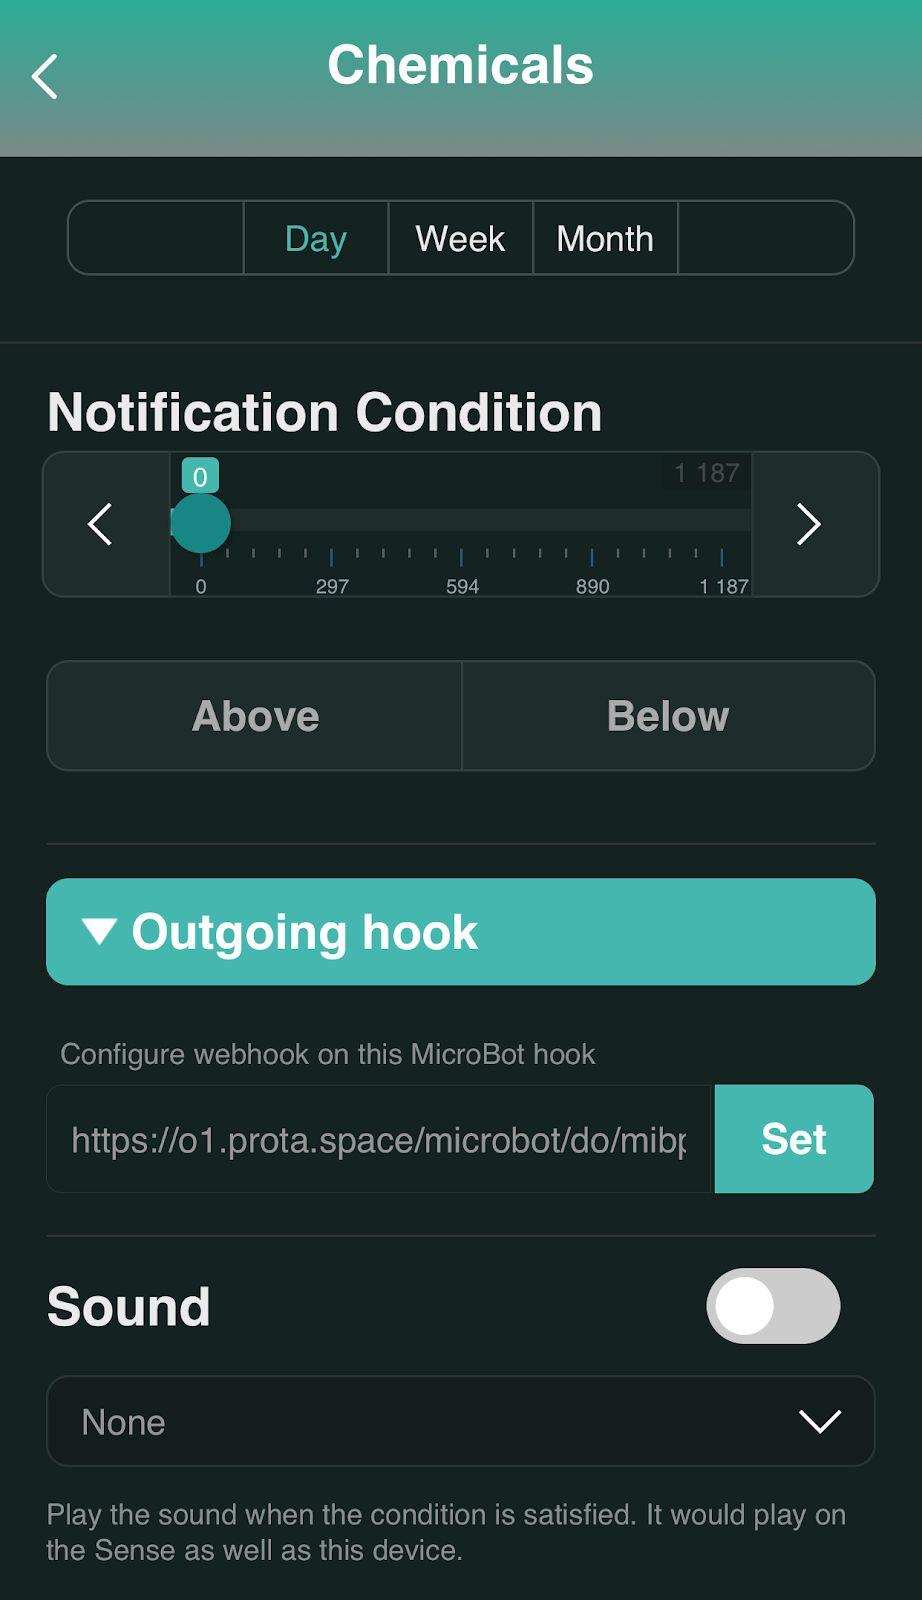 Connect MicroBot Push & IFTTT To use MicroBot Push with IFTTT, you need to enable the MicroBot Push service on IFTTT.